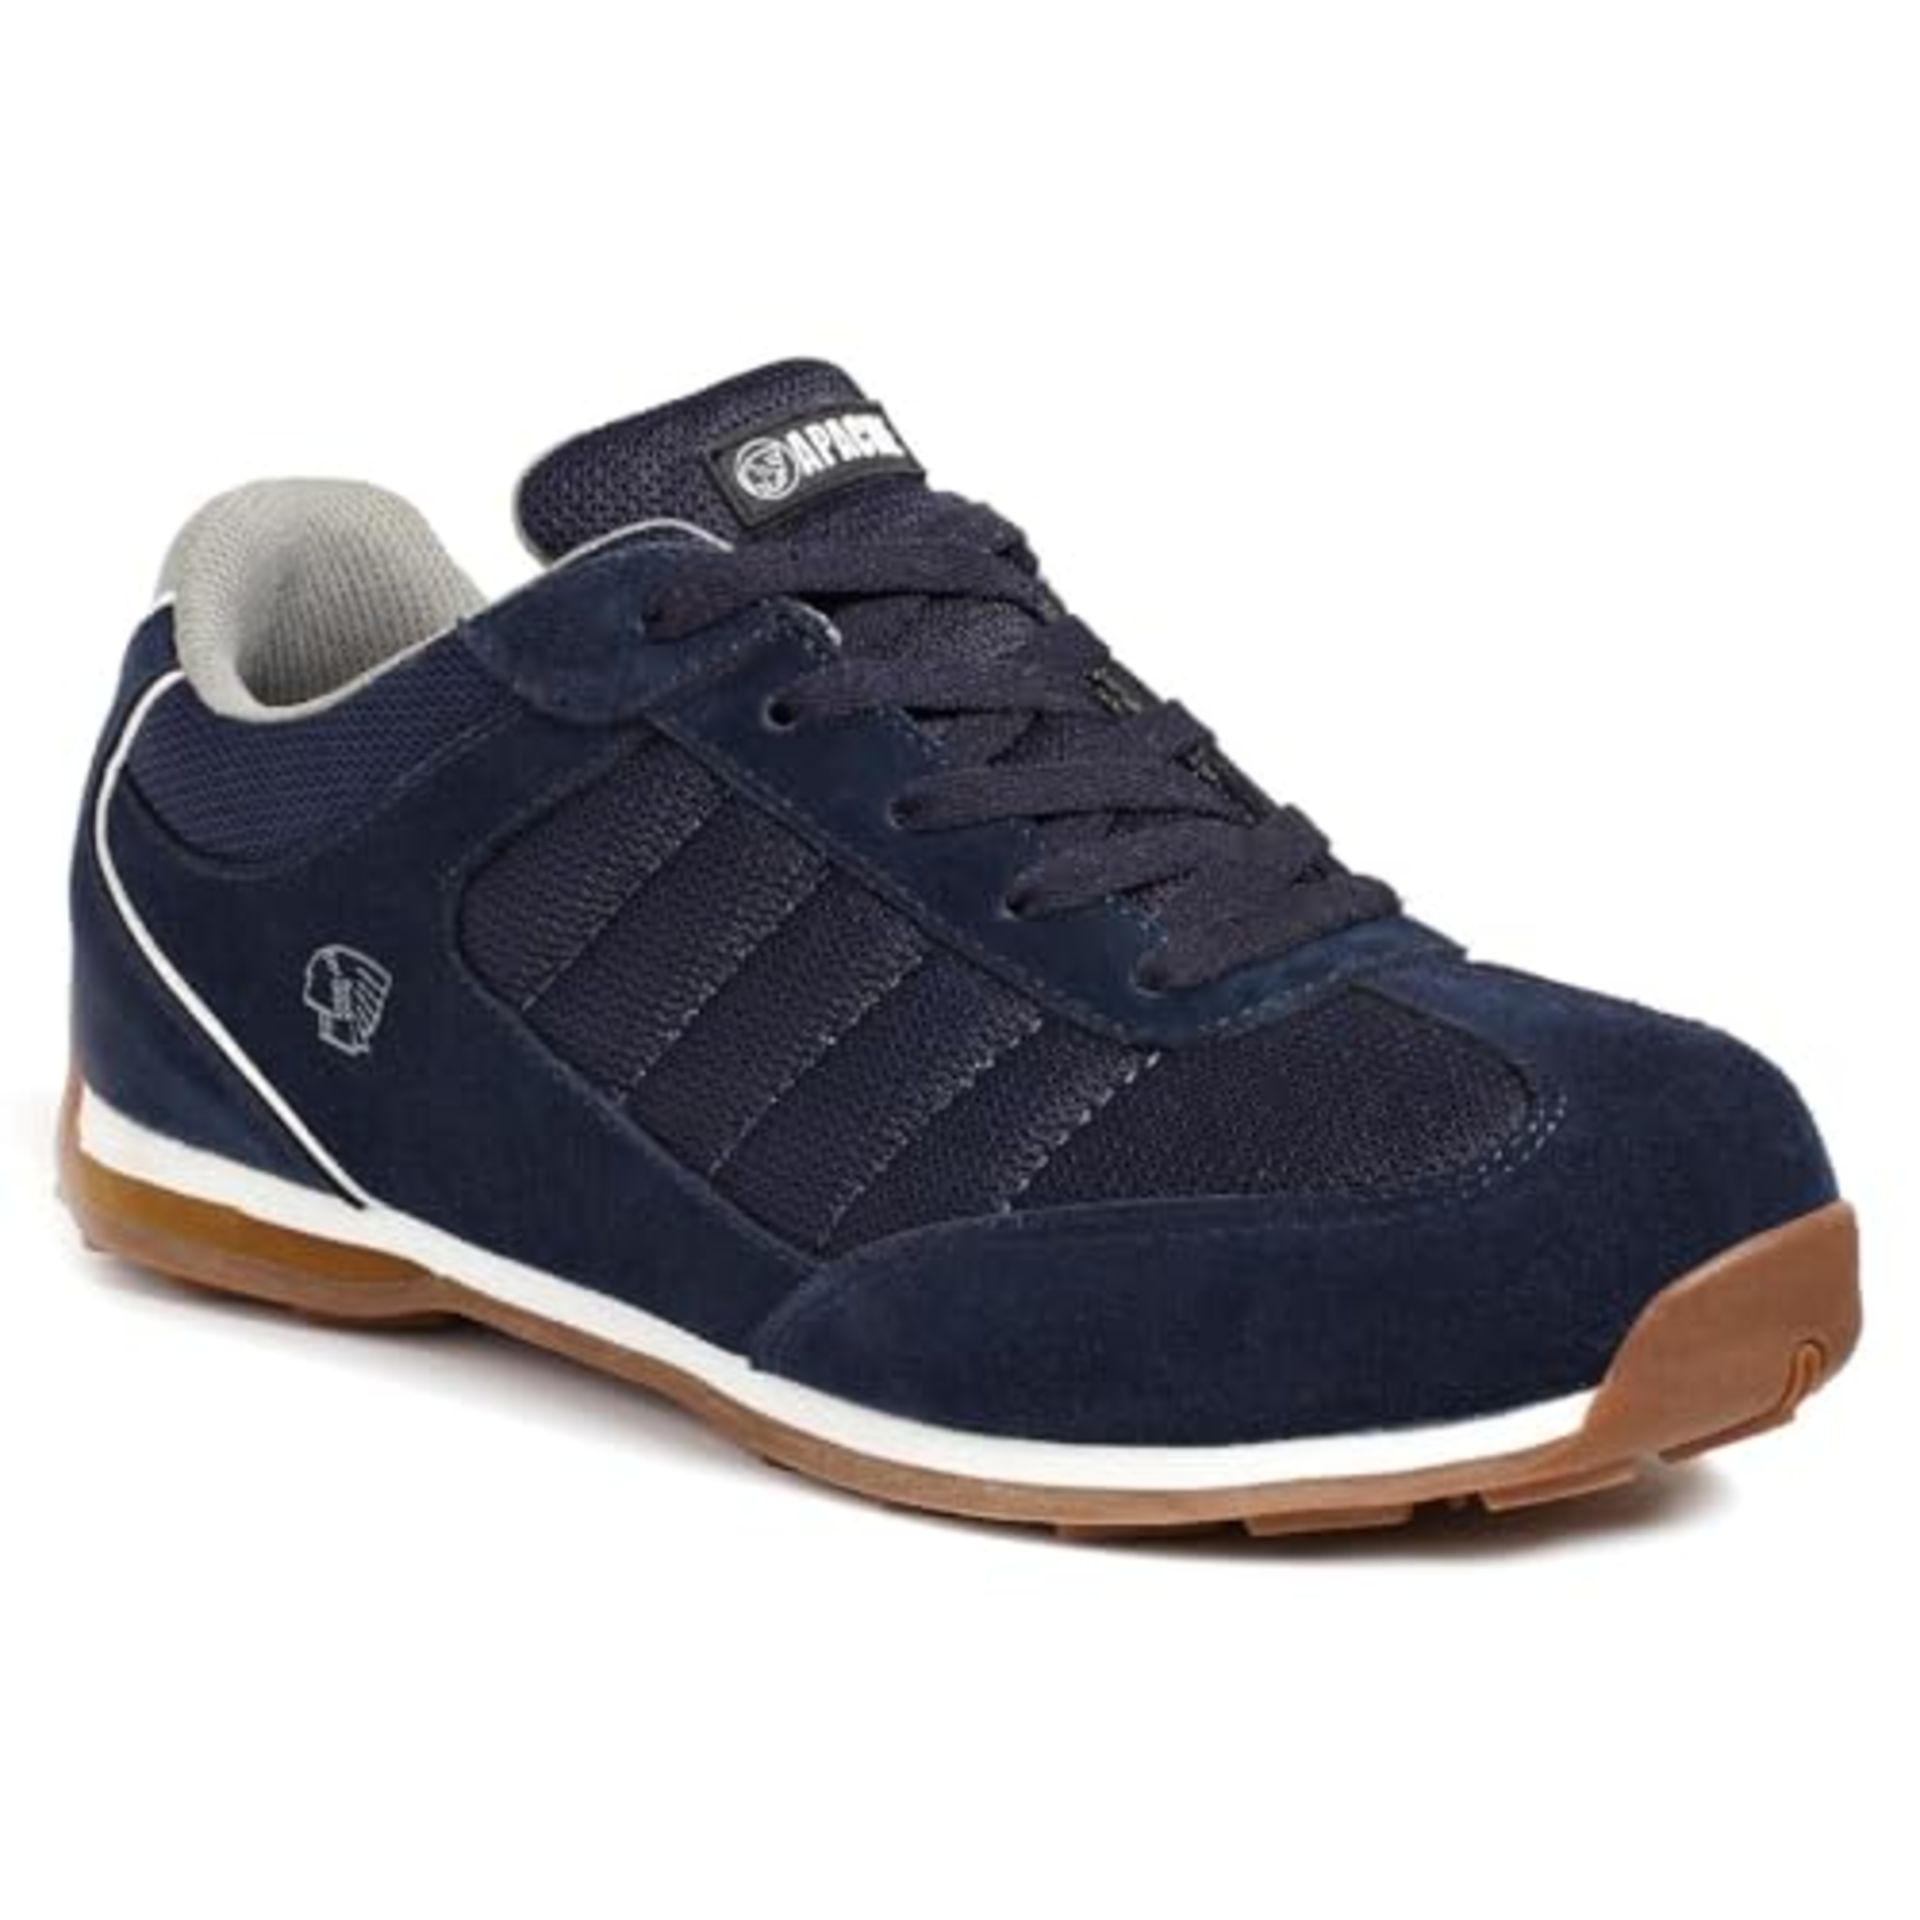 Apache Strike Safety Trainers | Navy Size 10 UK | Steel Toe Cap | Midsole Protection |